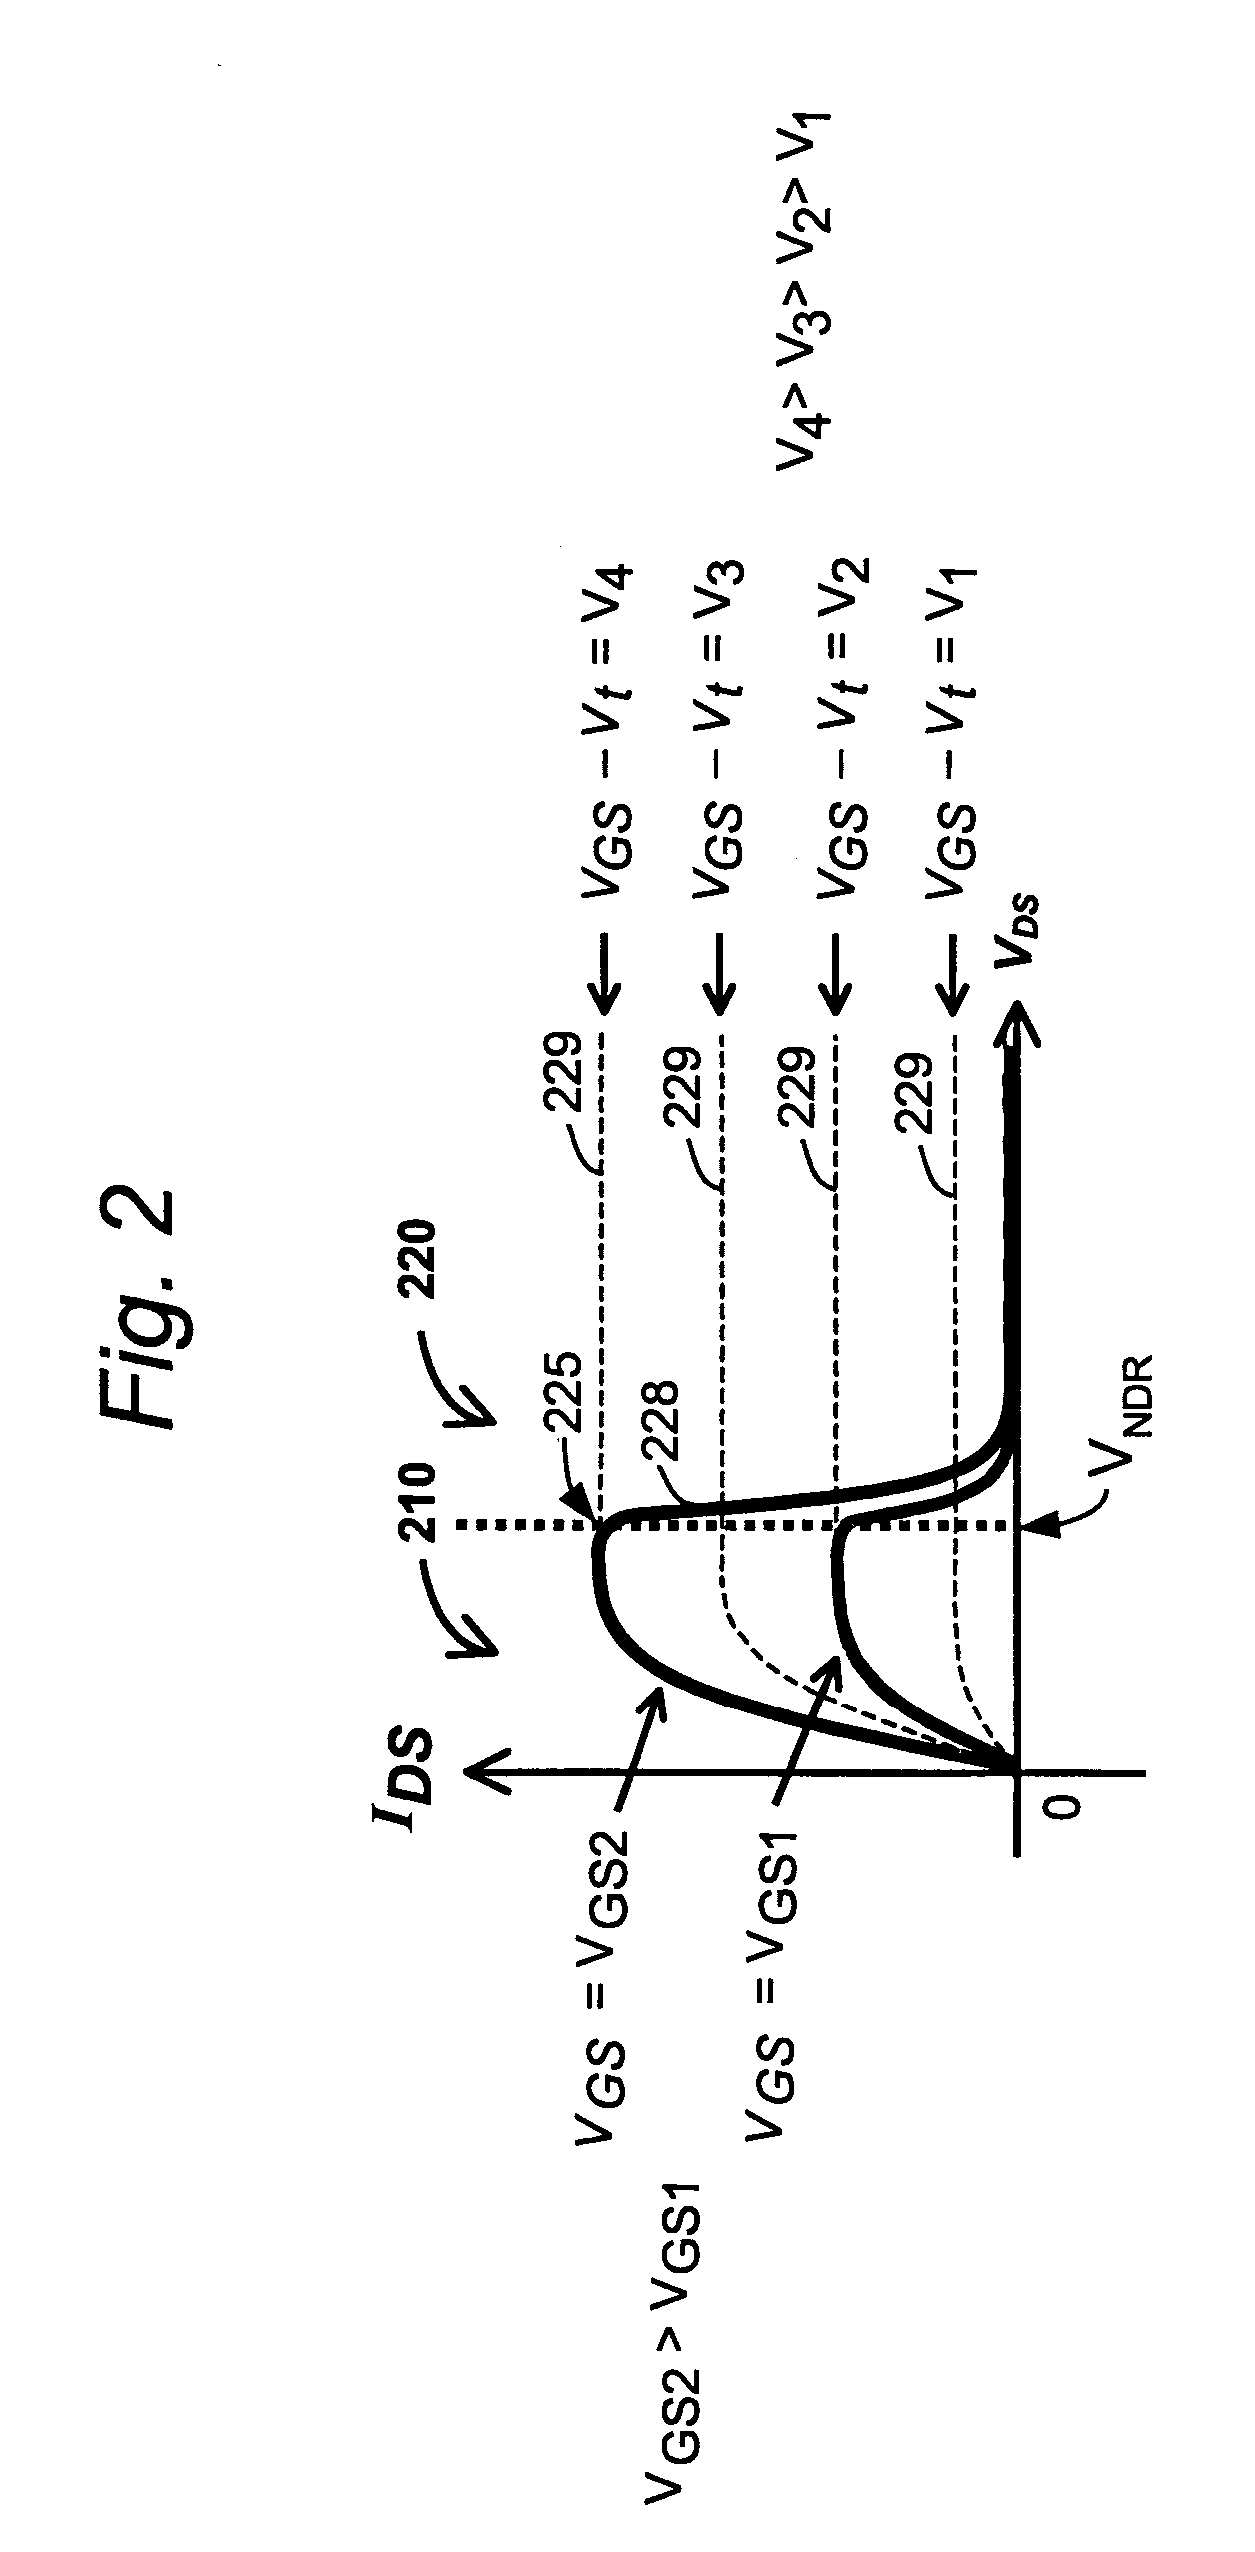 Charge trapping device and method of forming the same